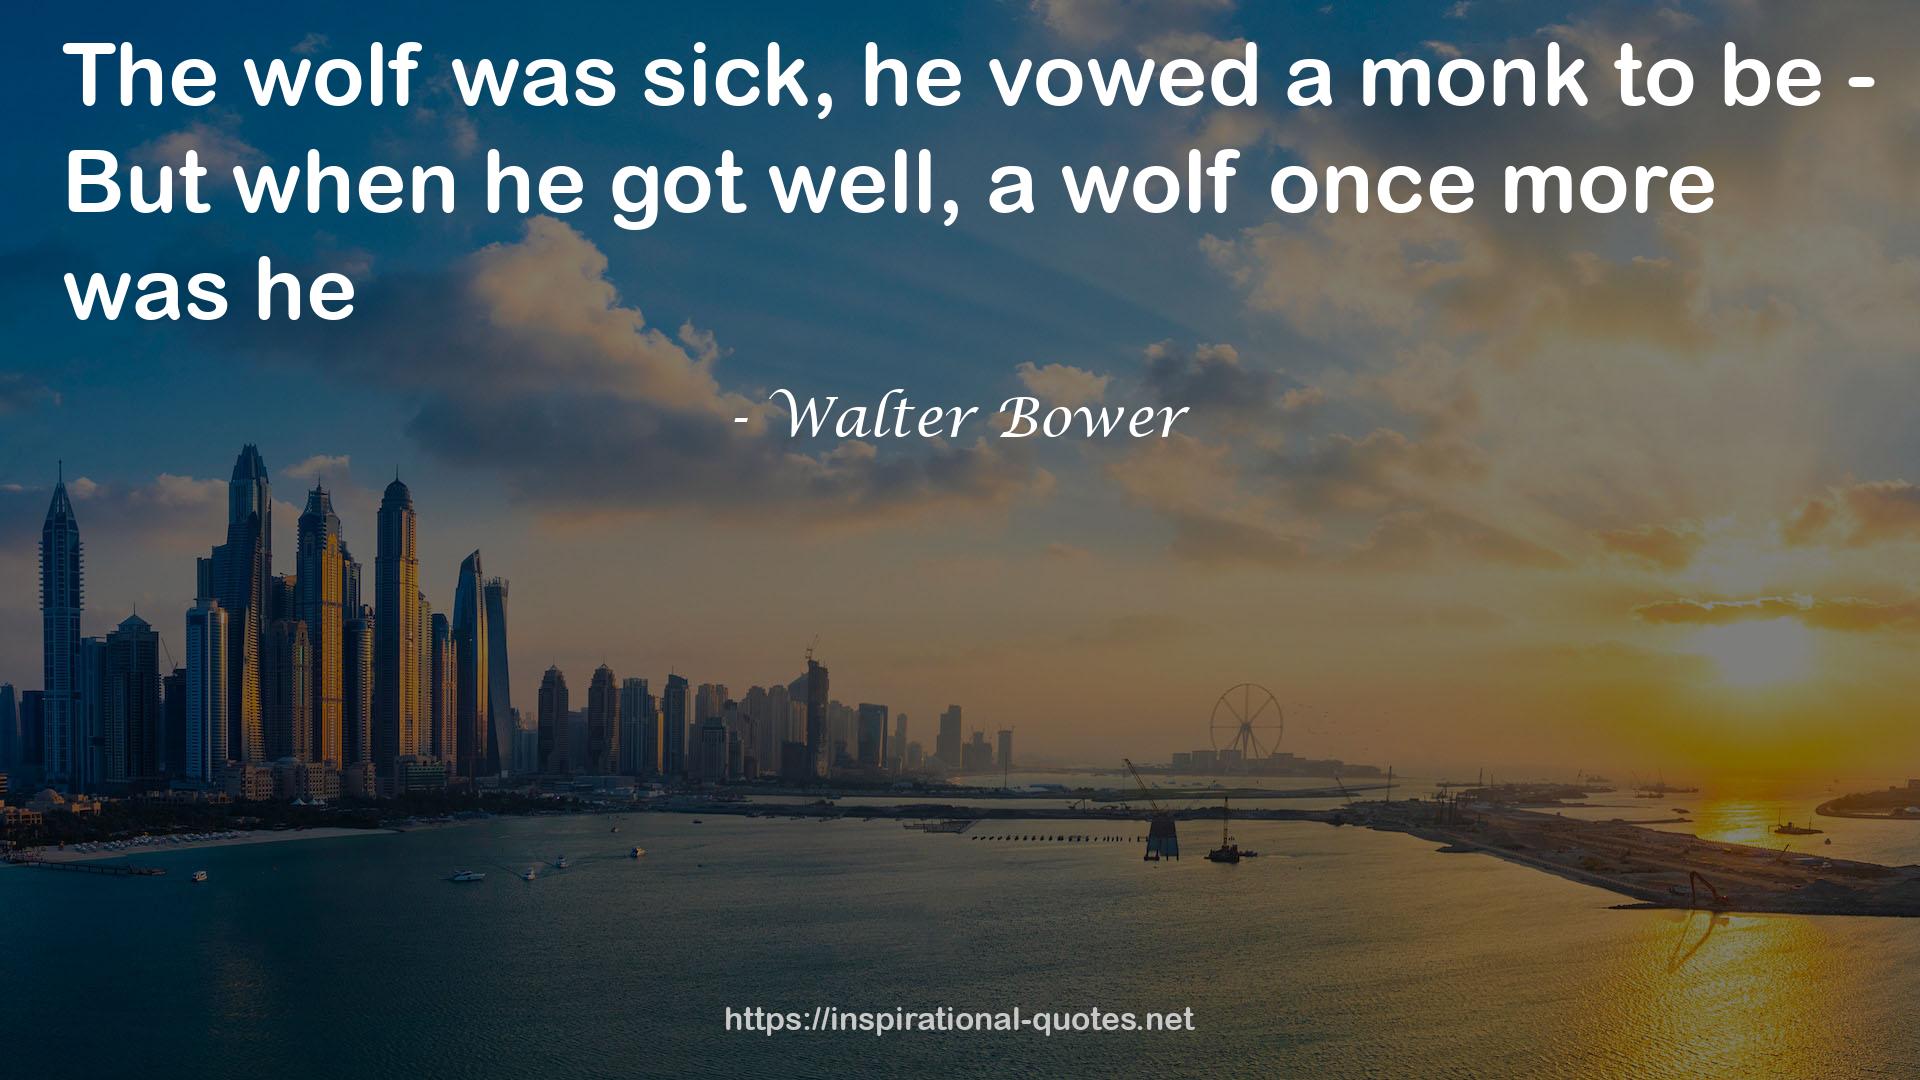 Walter Bower QUOTES